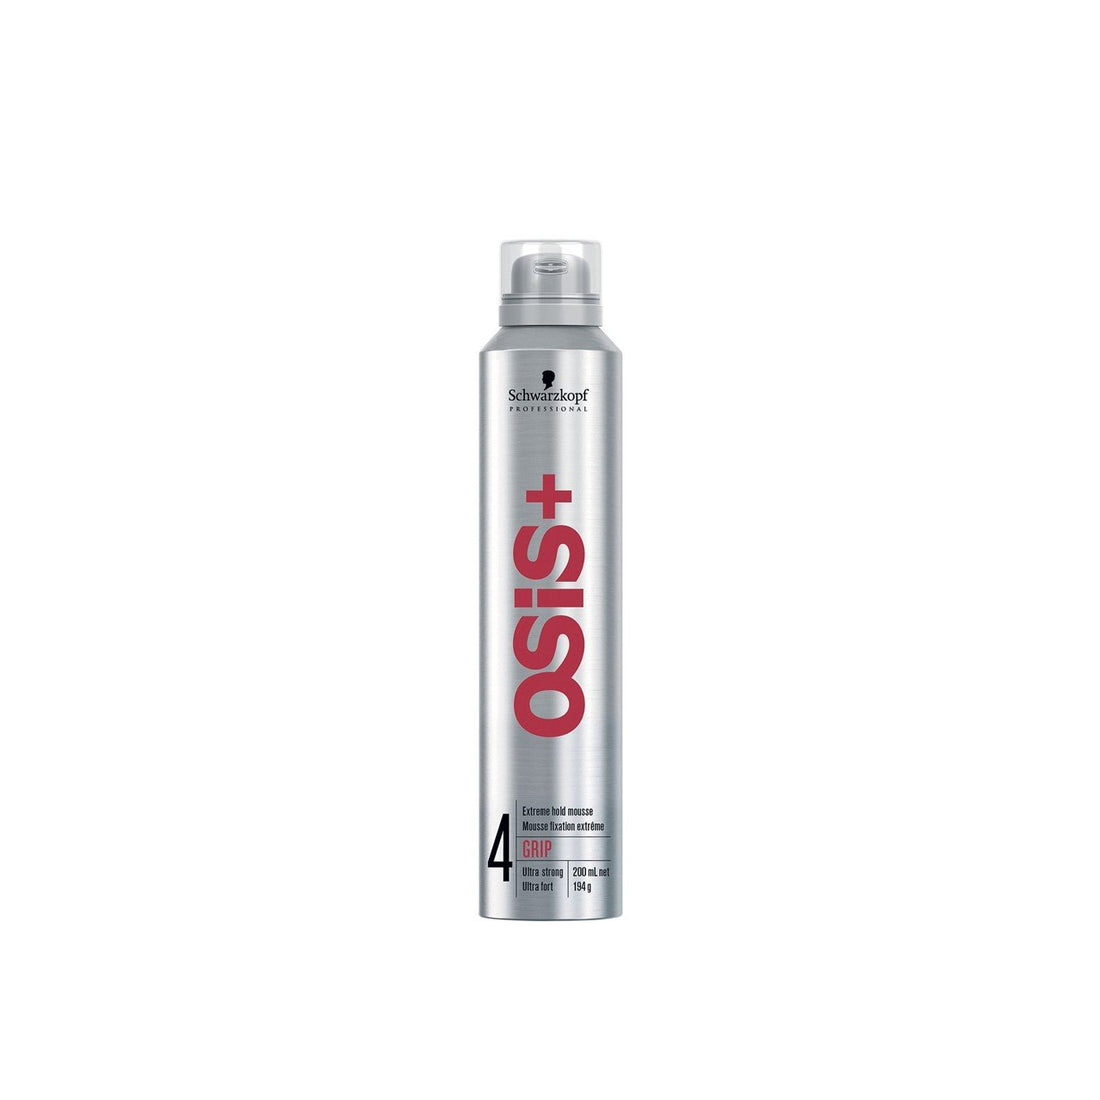 Schwarzkopf OSiS+ Grip Extreme Hold Mousse Ultra Strong 200ml